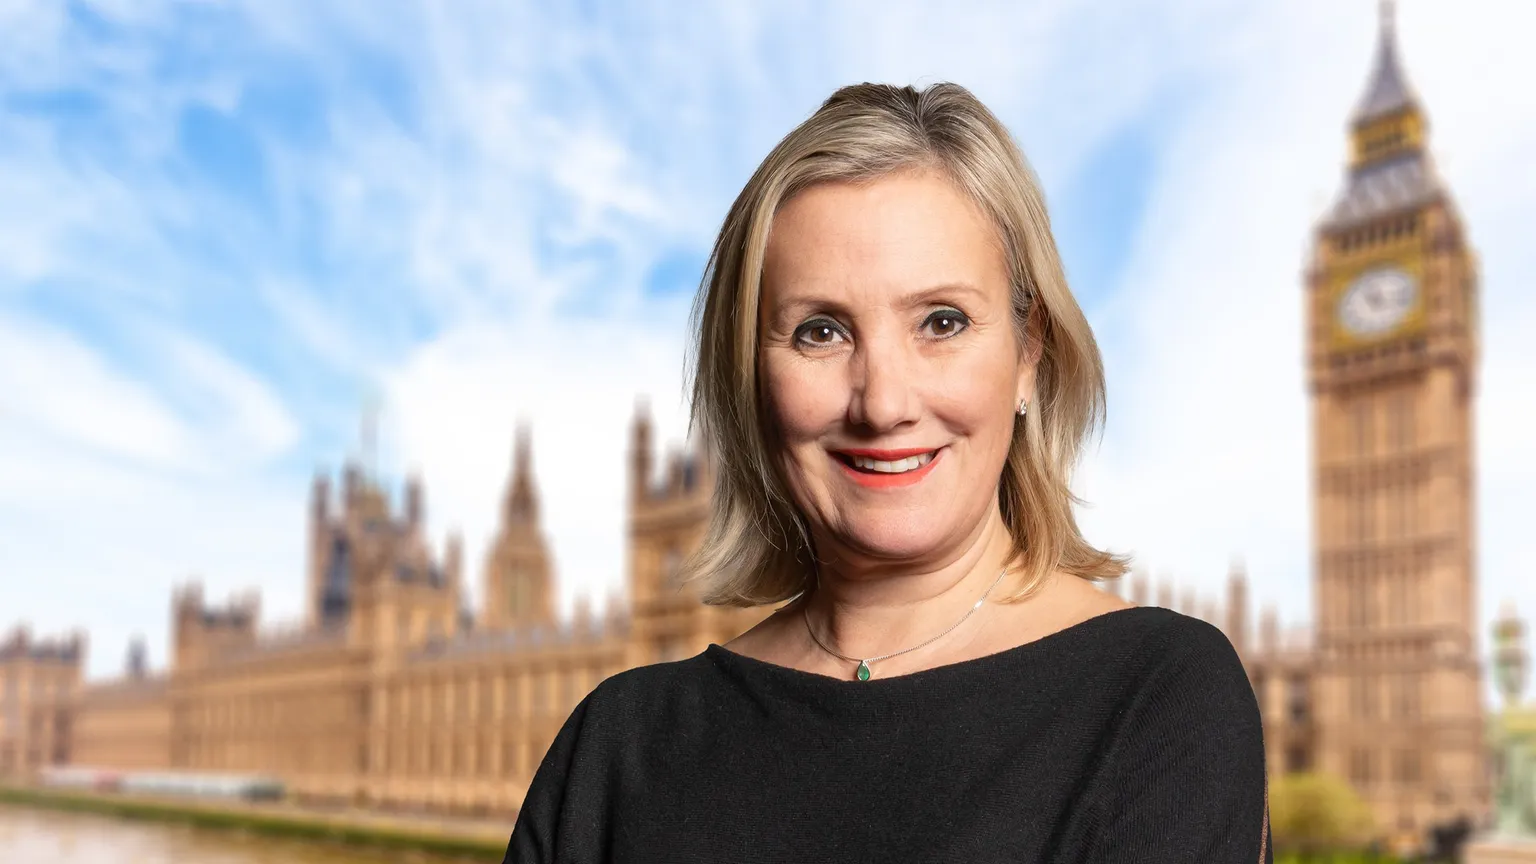 Dame Caroline Dinenage, Minister of State for Digital and Culture. Image: Parliament UK